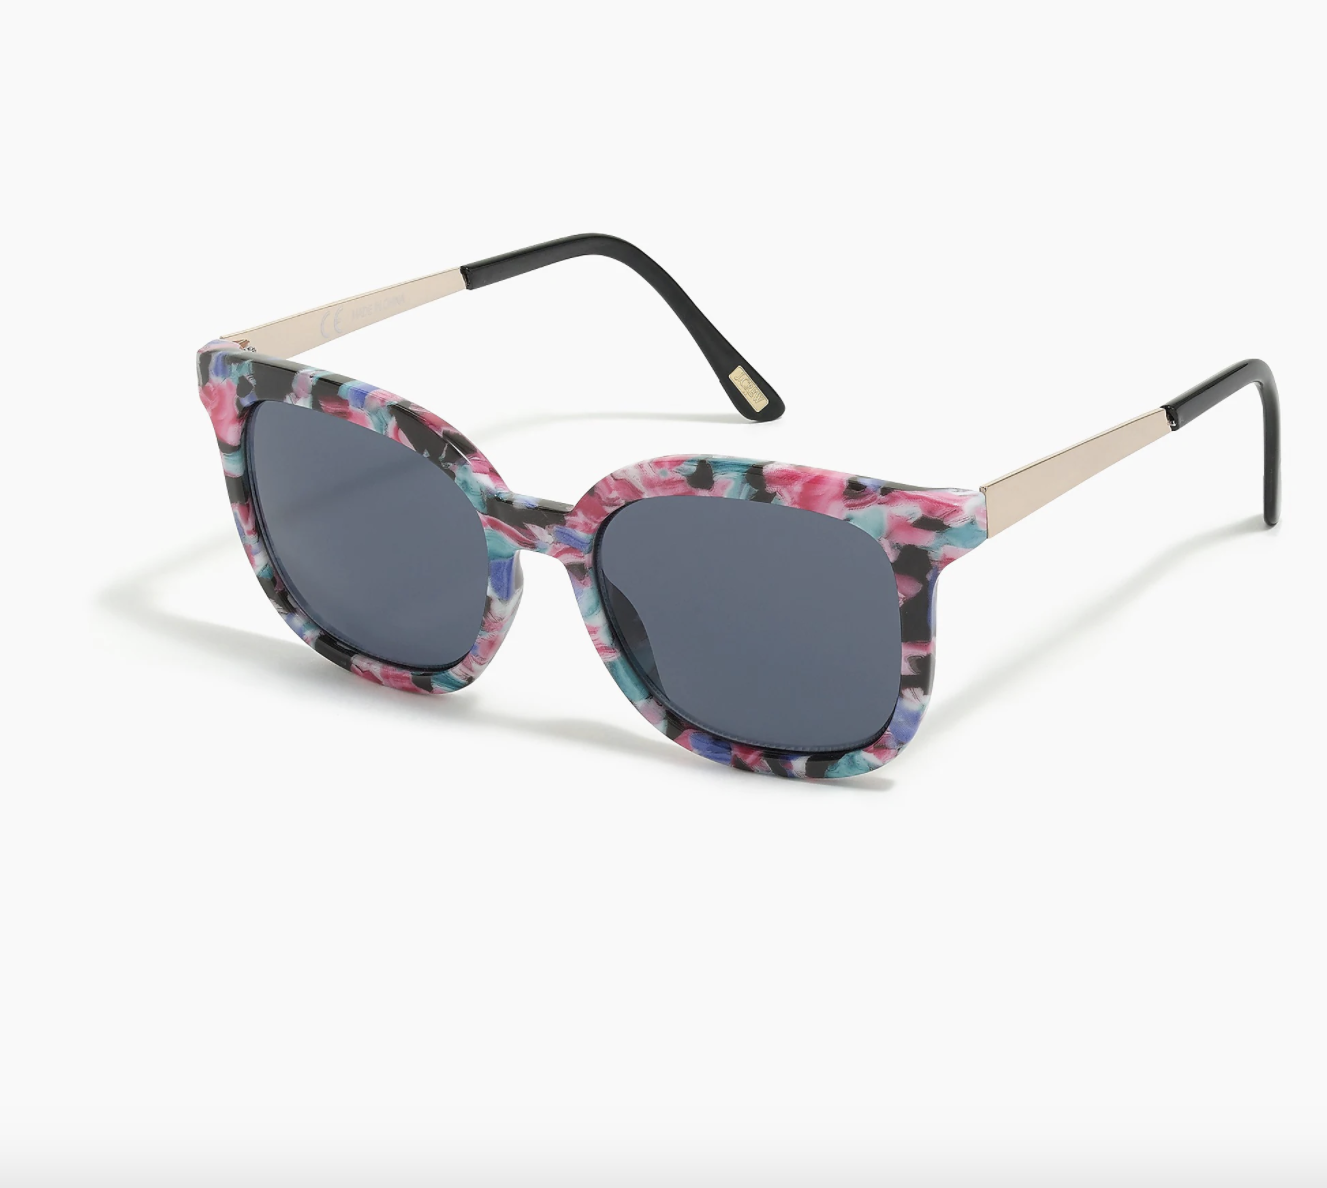 the sunglasses, which are black with a floral pattern around the border